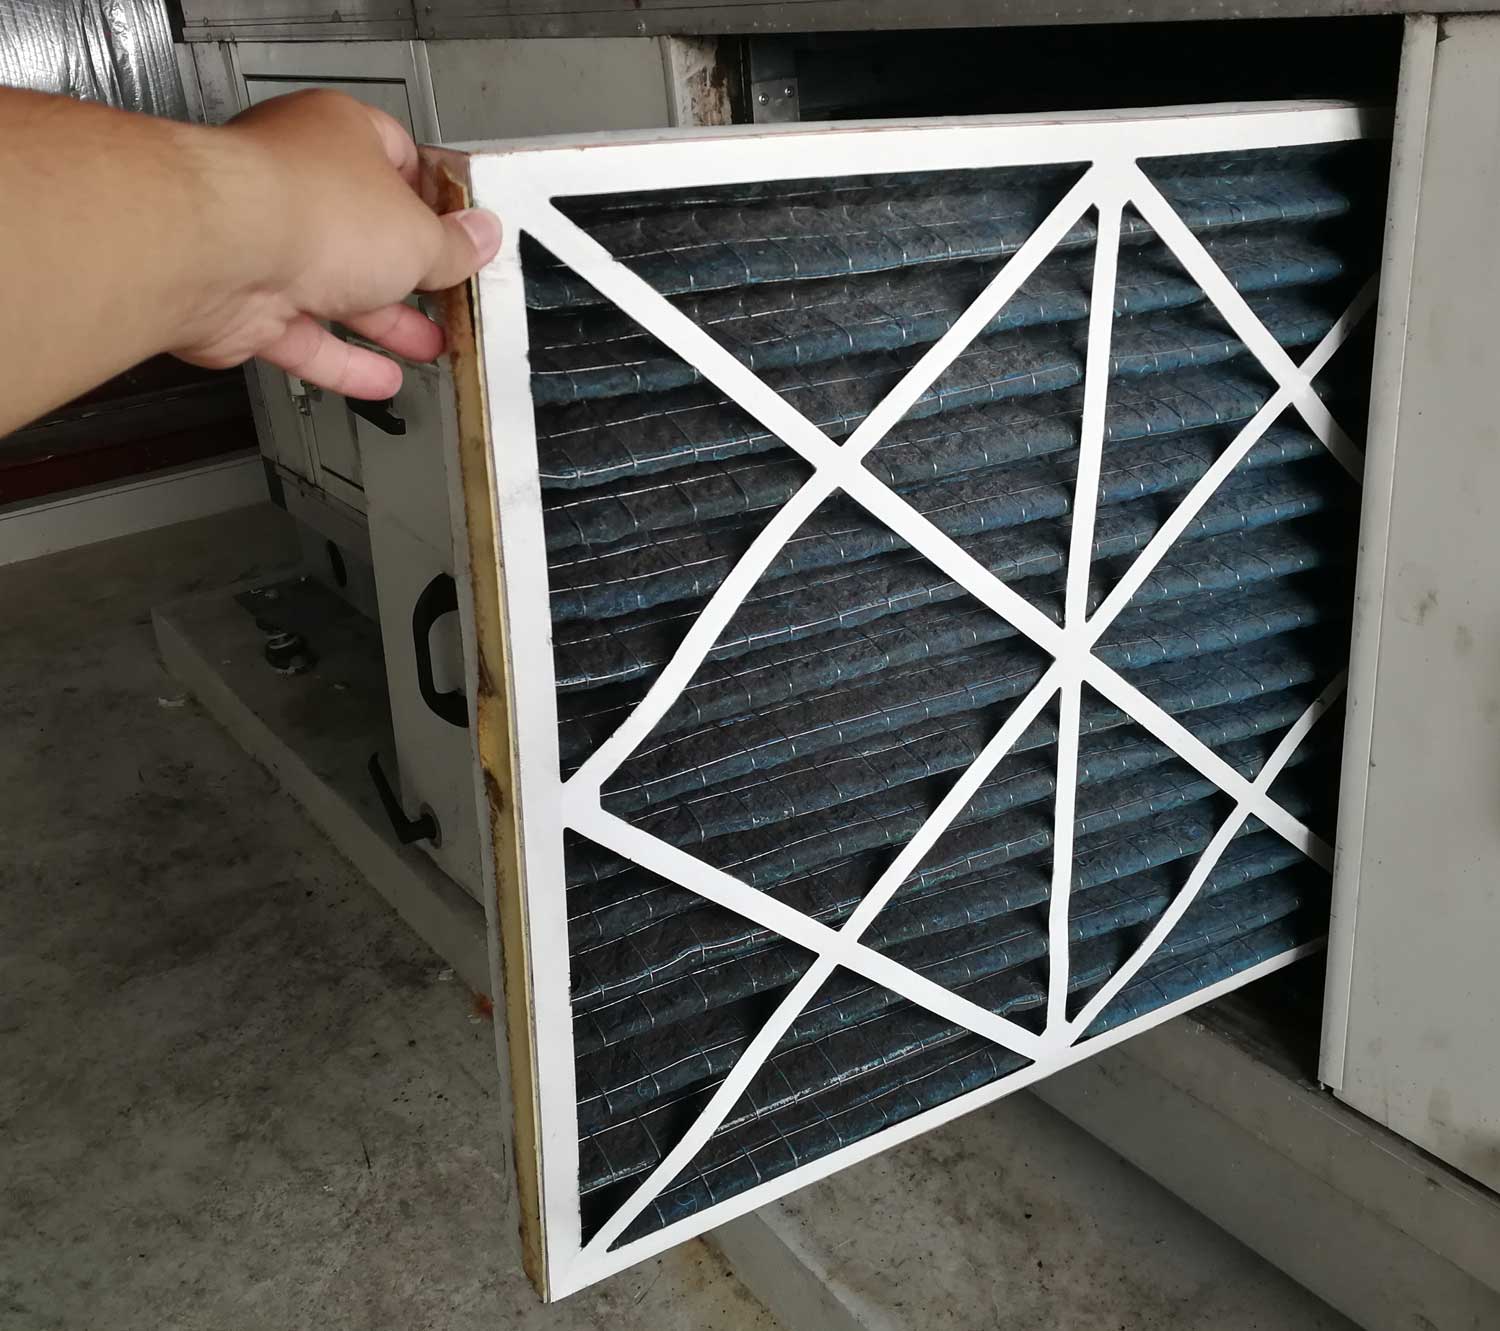 Changing Heater Filter